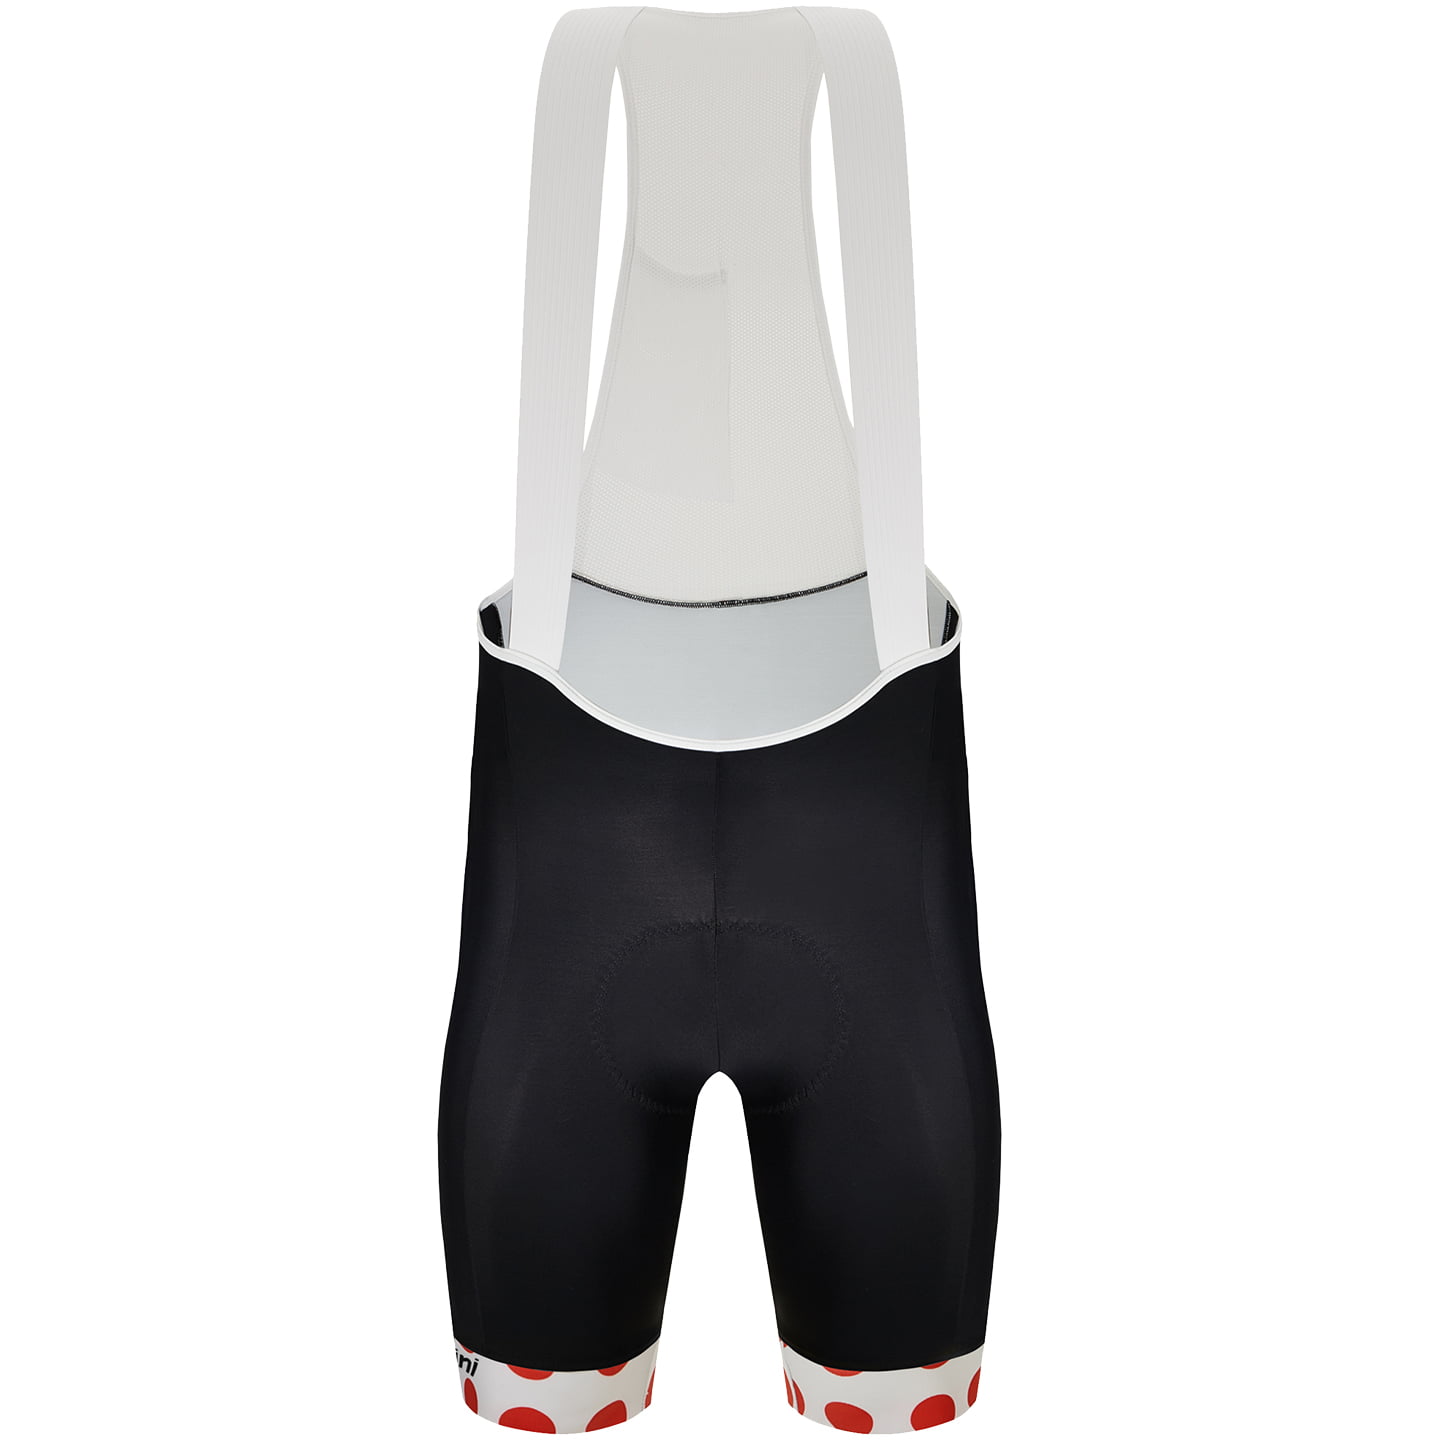 TOUR DE FRANCE Race GPM Leader 2024 Bib Shorts, for men, size L, Cycle shorts, Cycling clothing